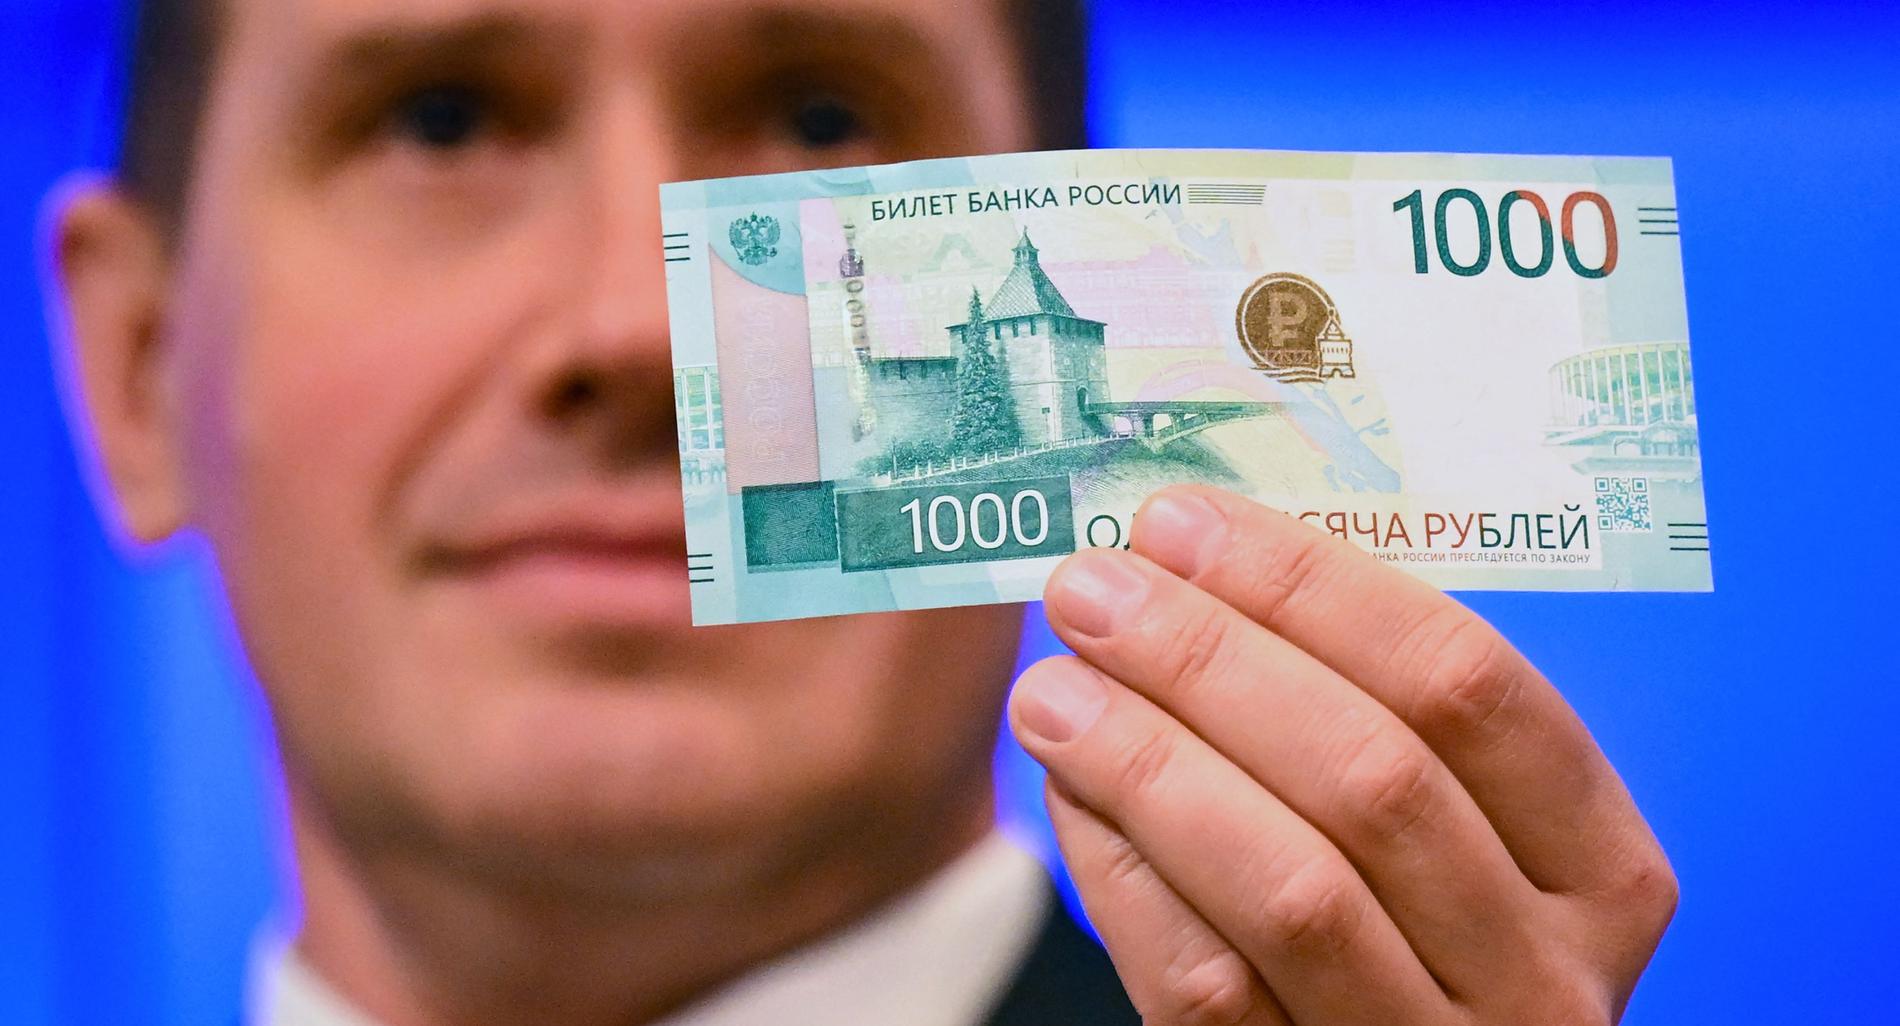 New banknote: The Central Bank of Russia recently introduced the new 1,000 ruble banknote.